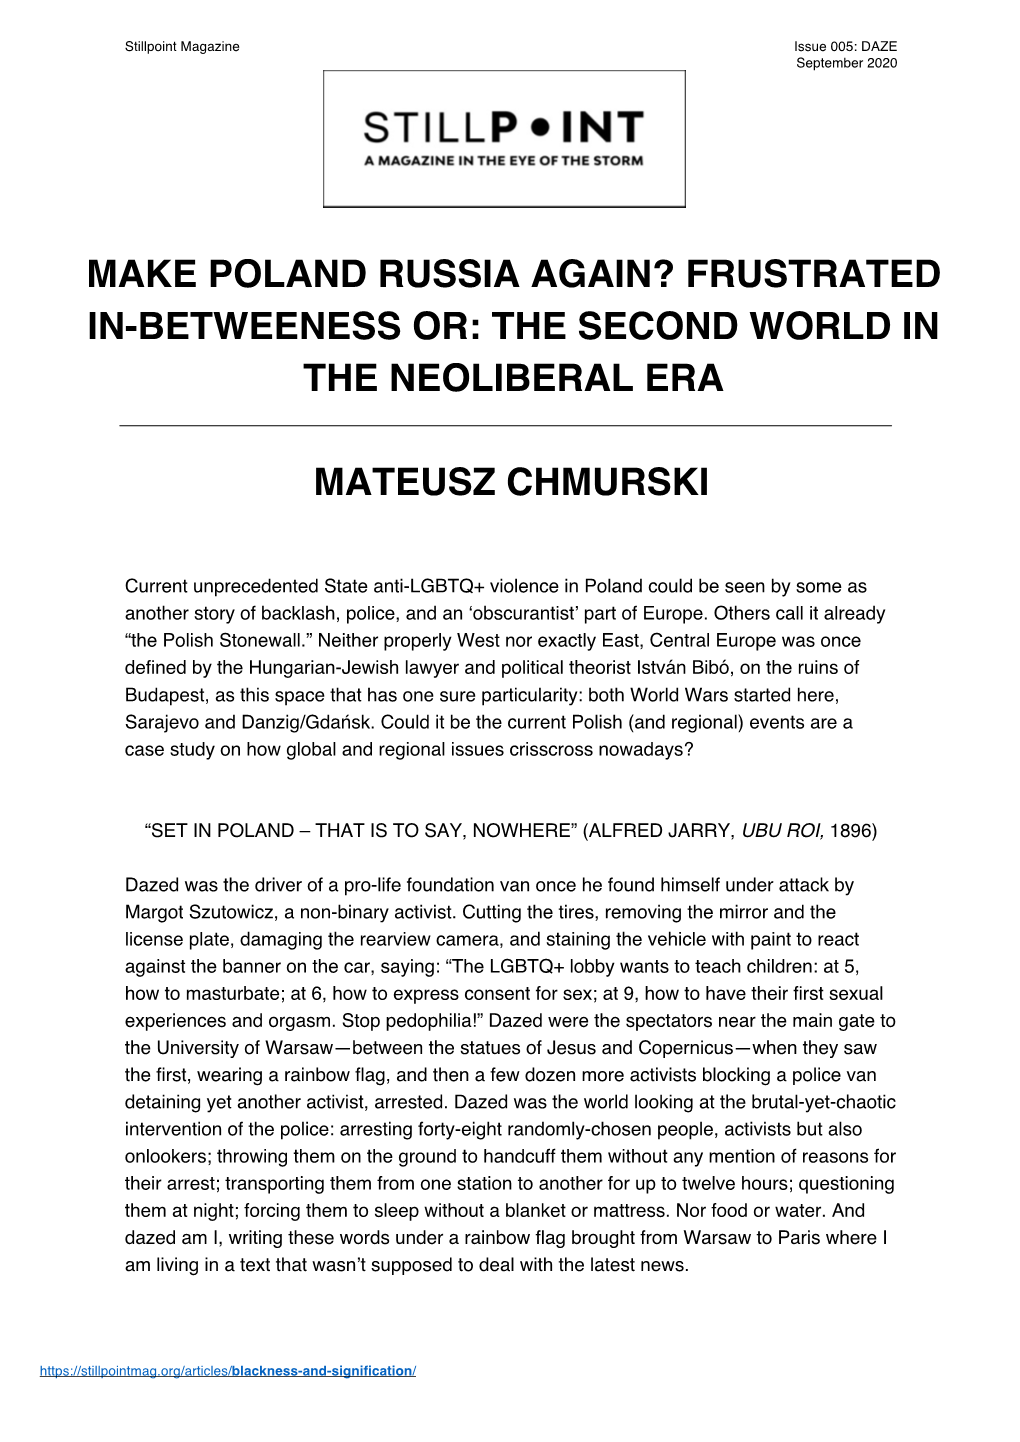 Make Poland Russia Again? Frustrated In-Betweeness Or: the Second World in the Neoliberal Era